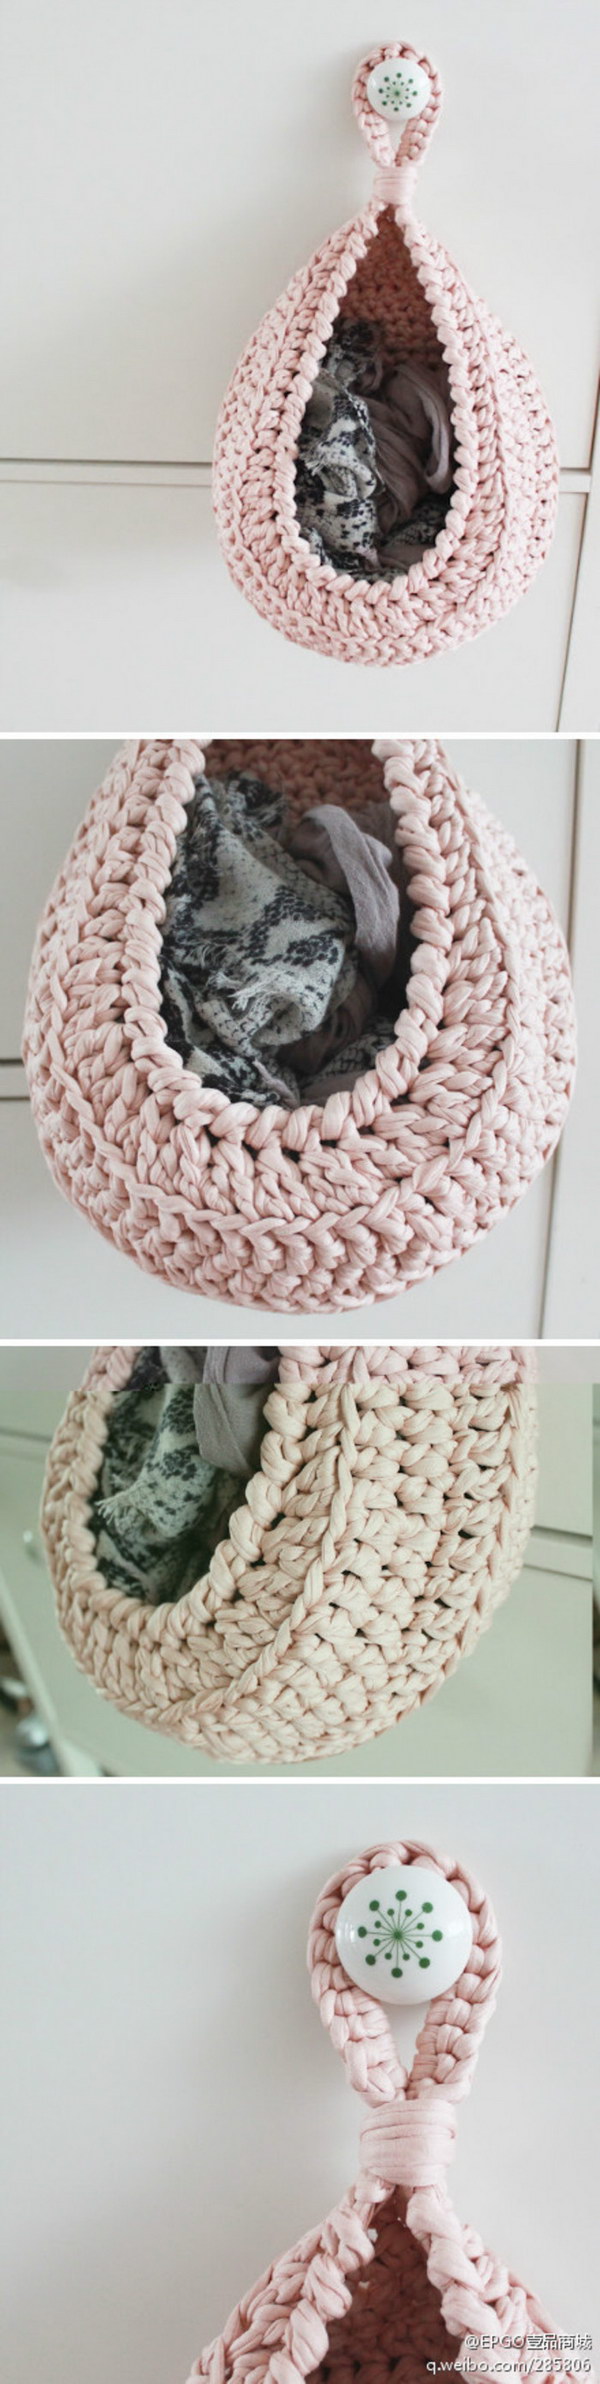 30 Awesome Crochet Projects With Lots Of Free Patterns For Beginners 2019,How To Blanch Almonds To Make Almond Flour